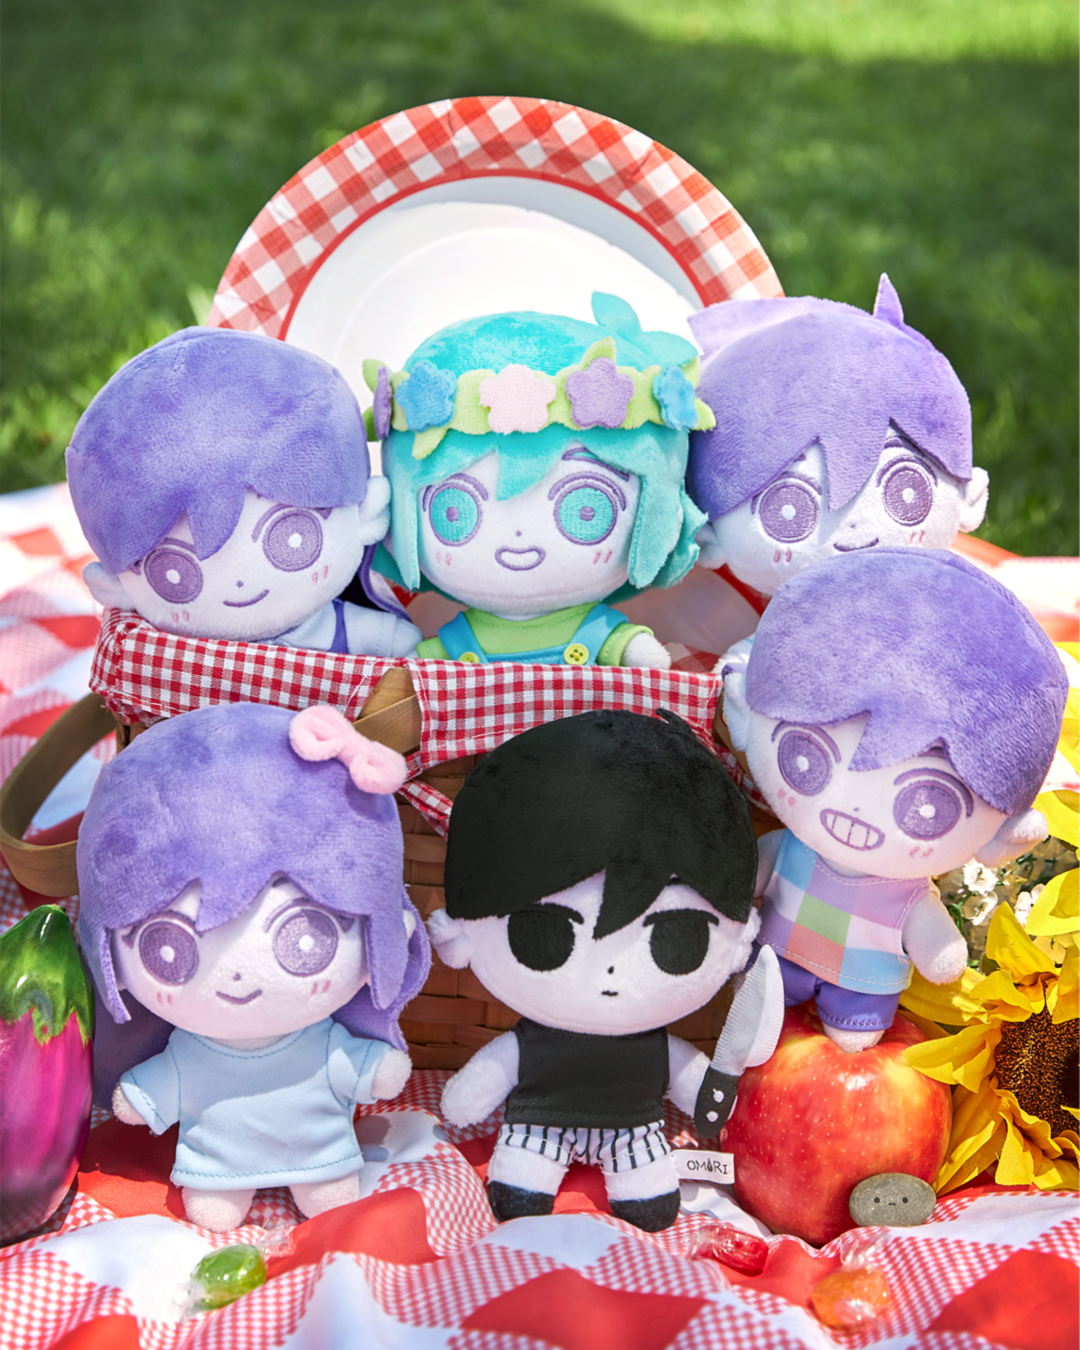 OMOCAT on X: OMORI plushies are now available! (